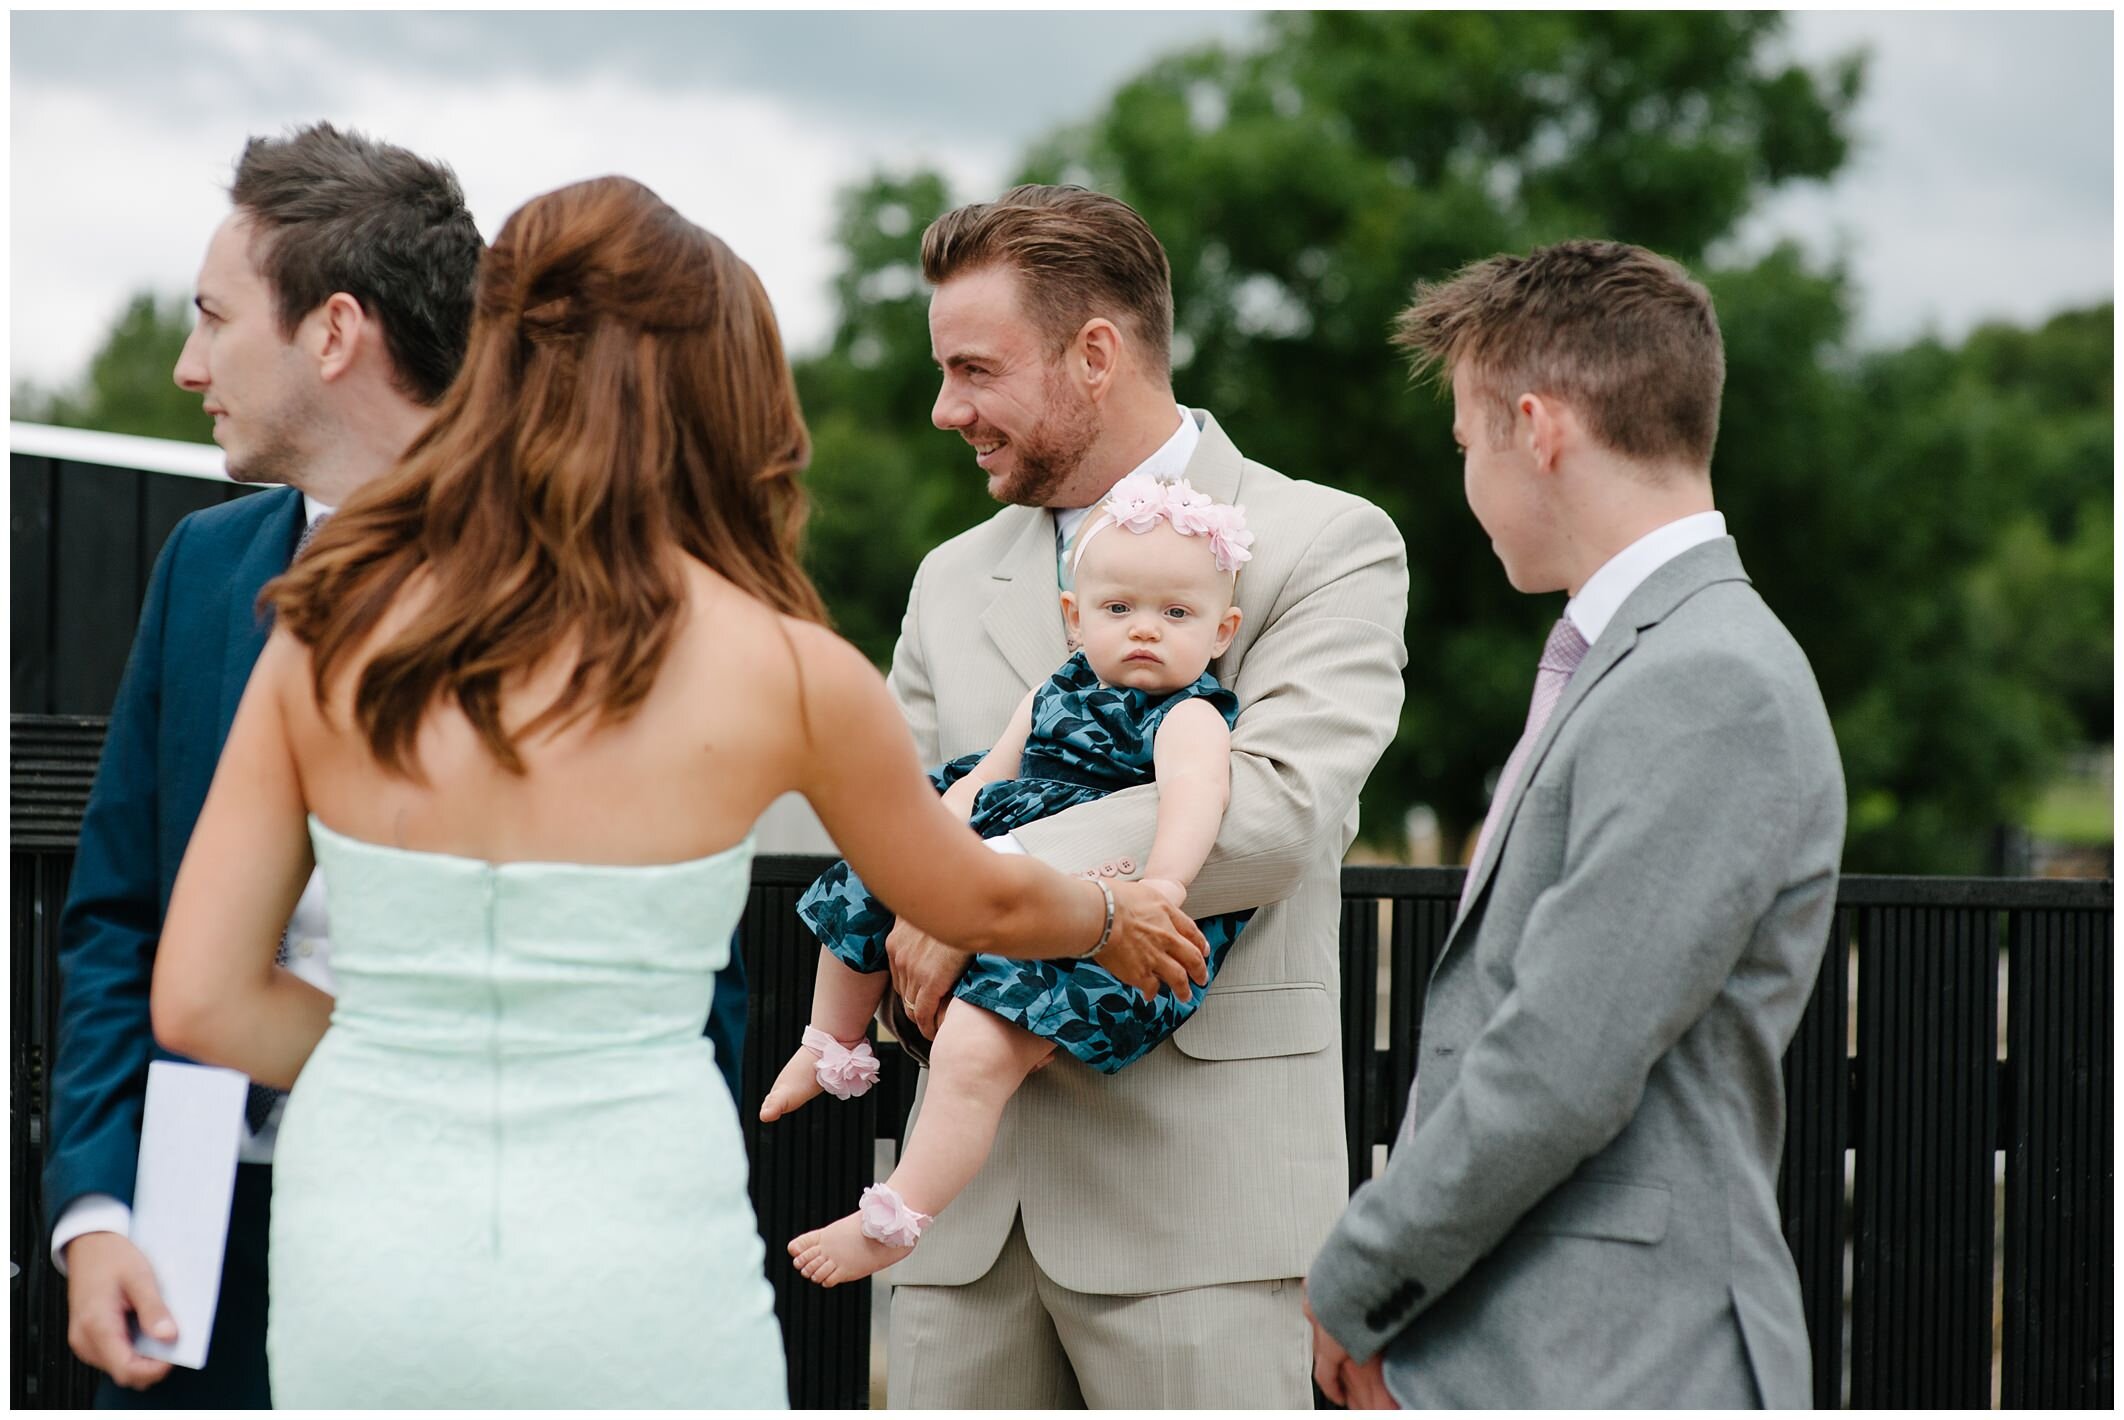 Lynsey_Andy_Rossharbour_Fermanagh_wedding_jude_browne_photography_0025.jpg